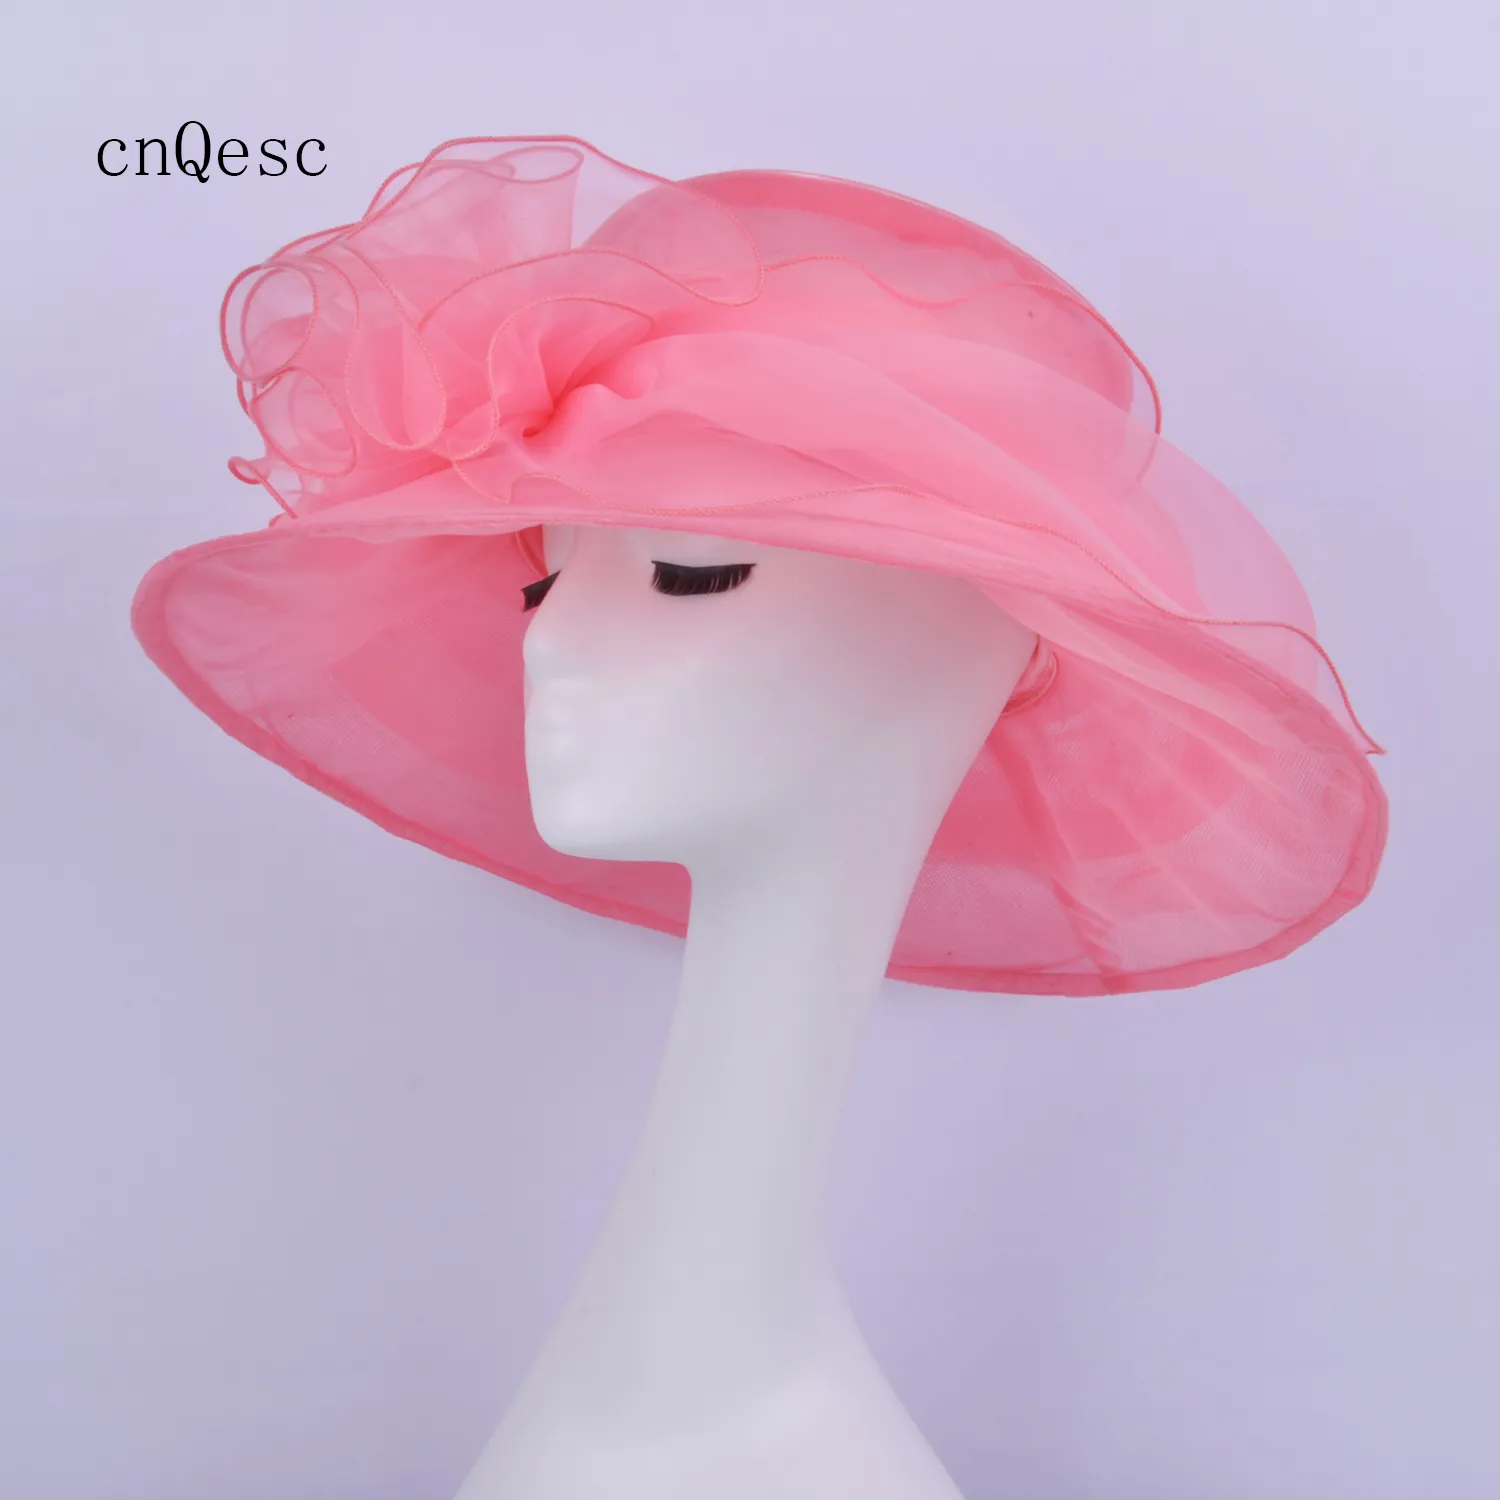 2019 Coral pink Big Organza Hat Net hat for Kentucky derby church wedding races party w/flower.